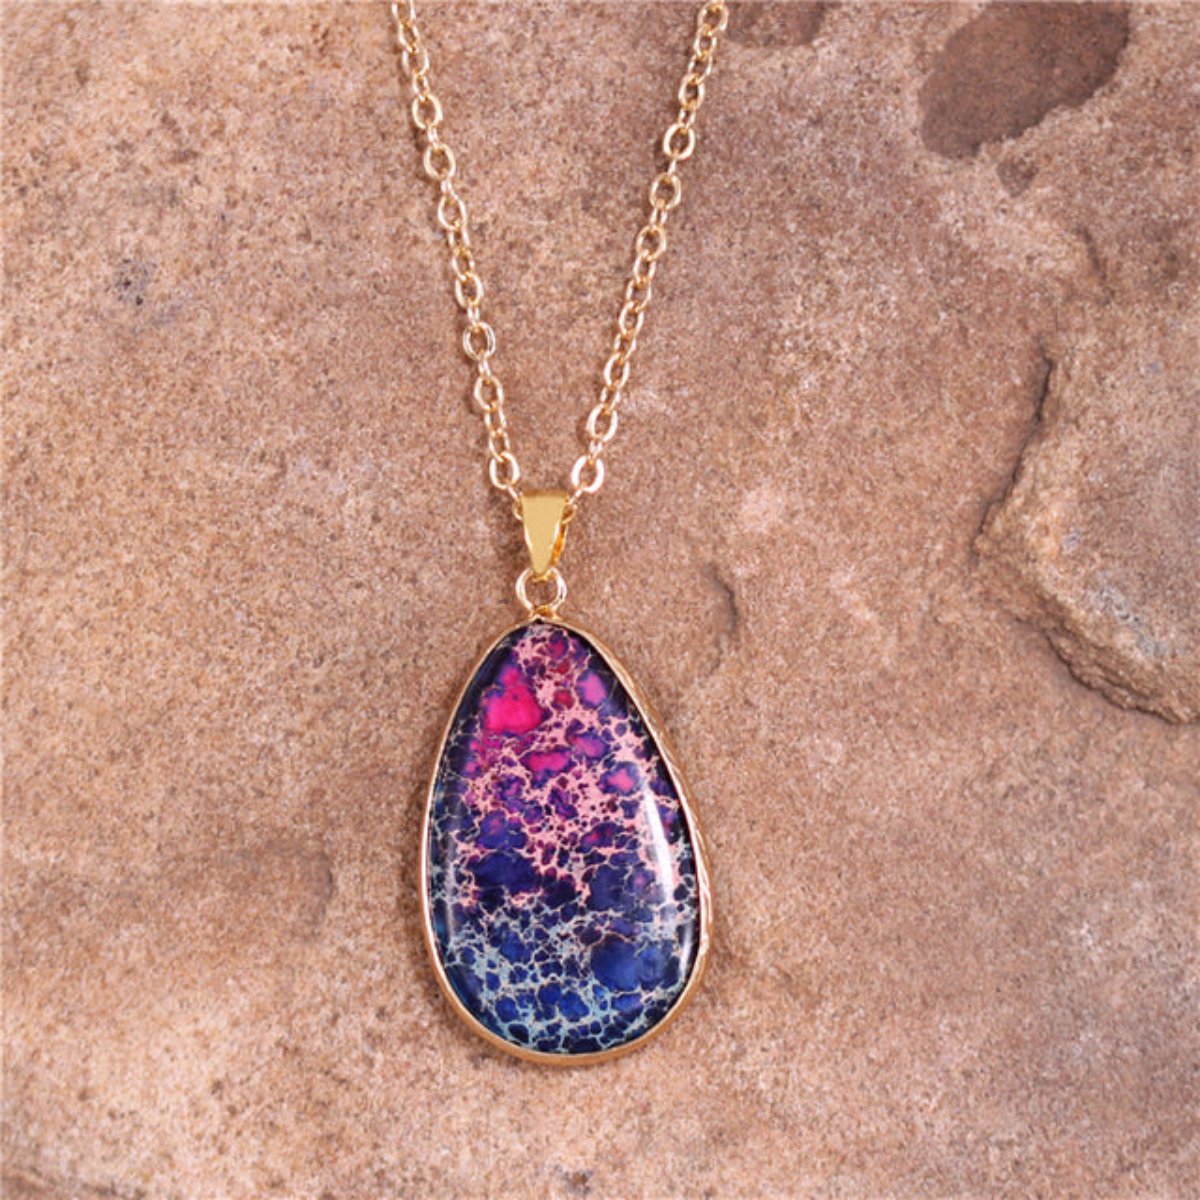 Modern Imperial Jaspers Gold Chain Teardrop Necklace - Magenta Imperial Jaspers - Necklaces - Pretland | Spiritual Crystals & Jewelry